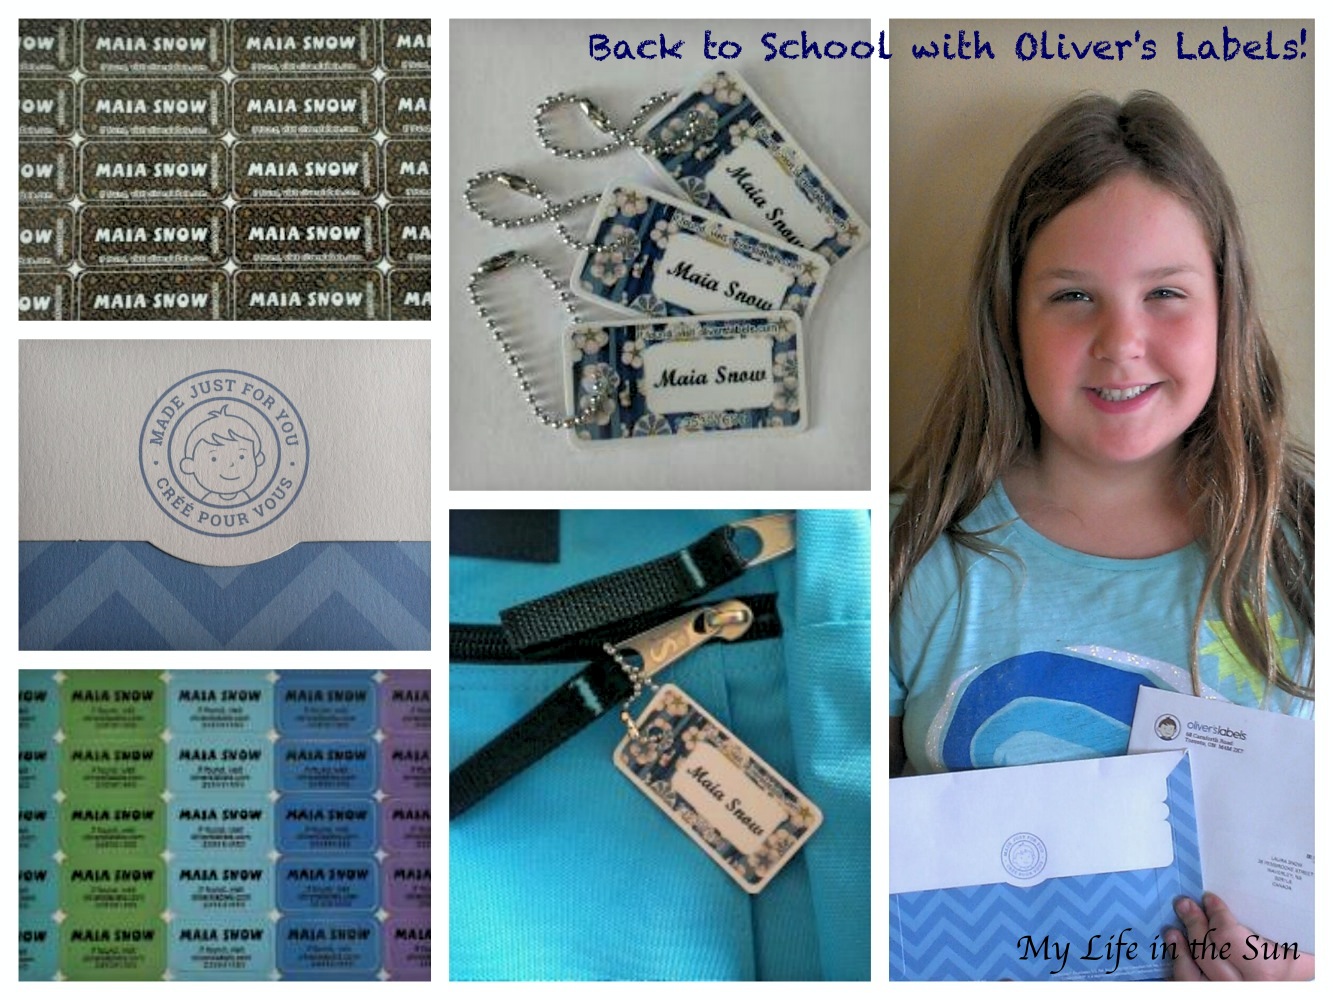 Back to School with Oliver’s Labels